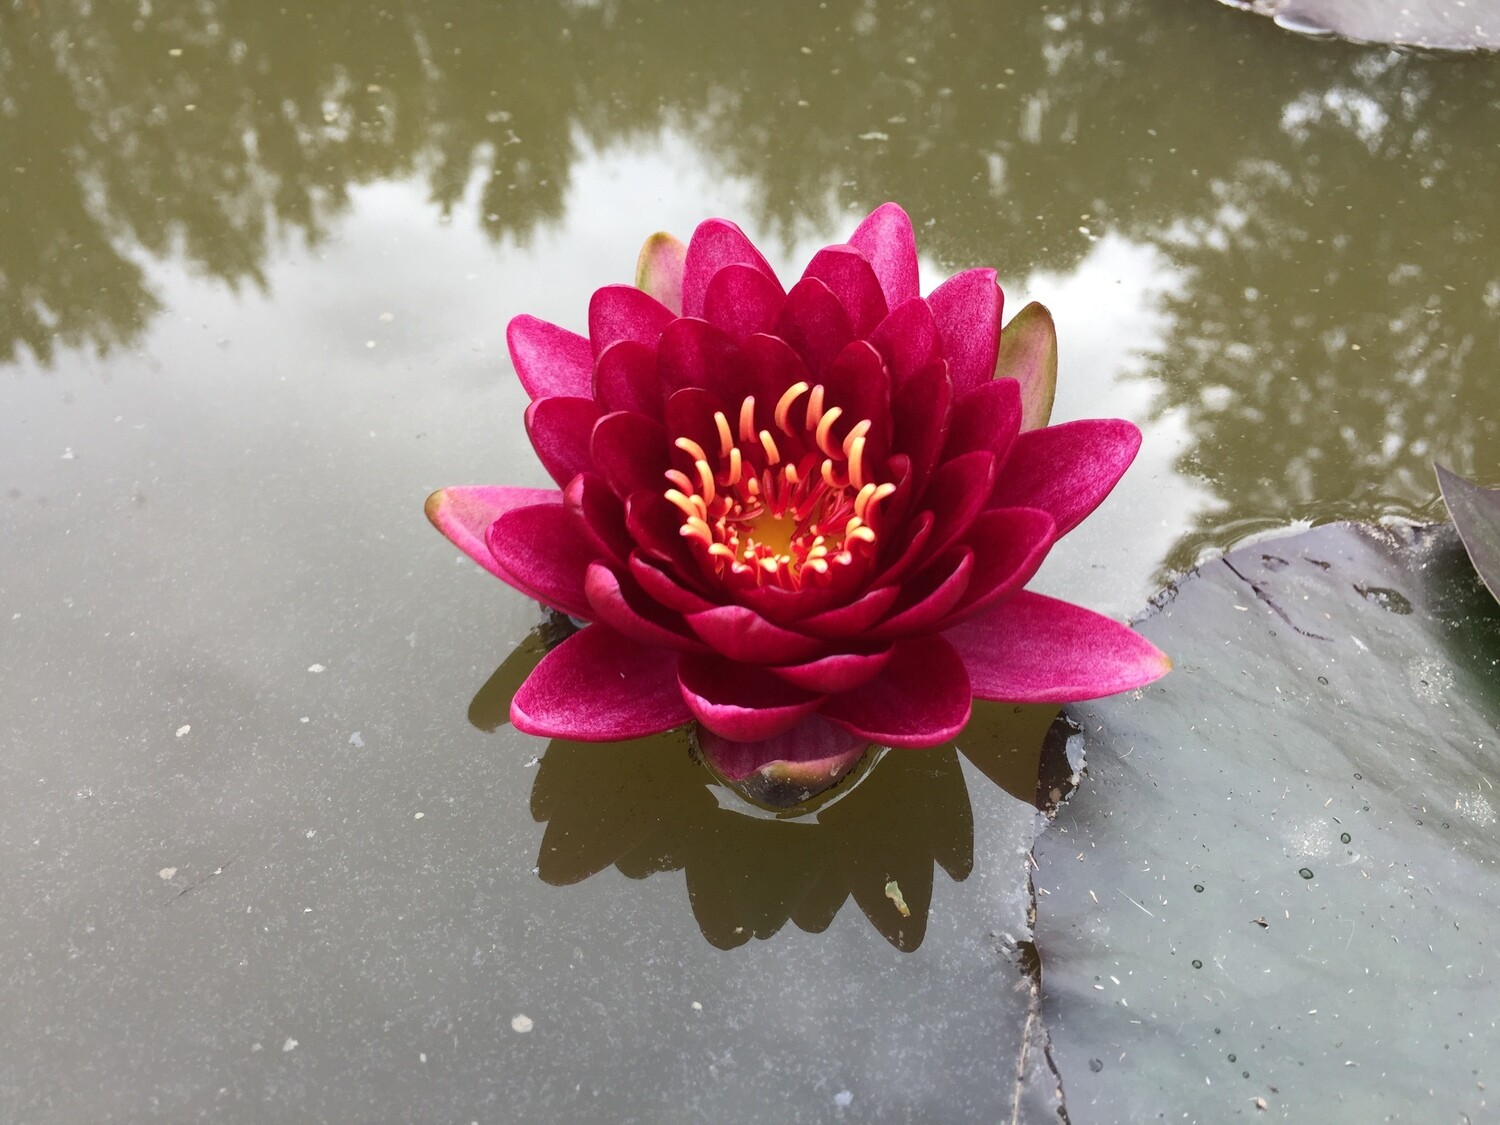 N 'Cranberry' Water Lily